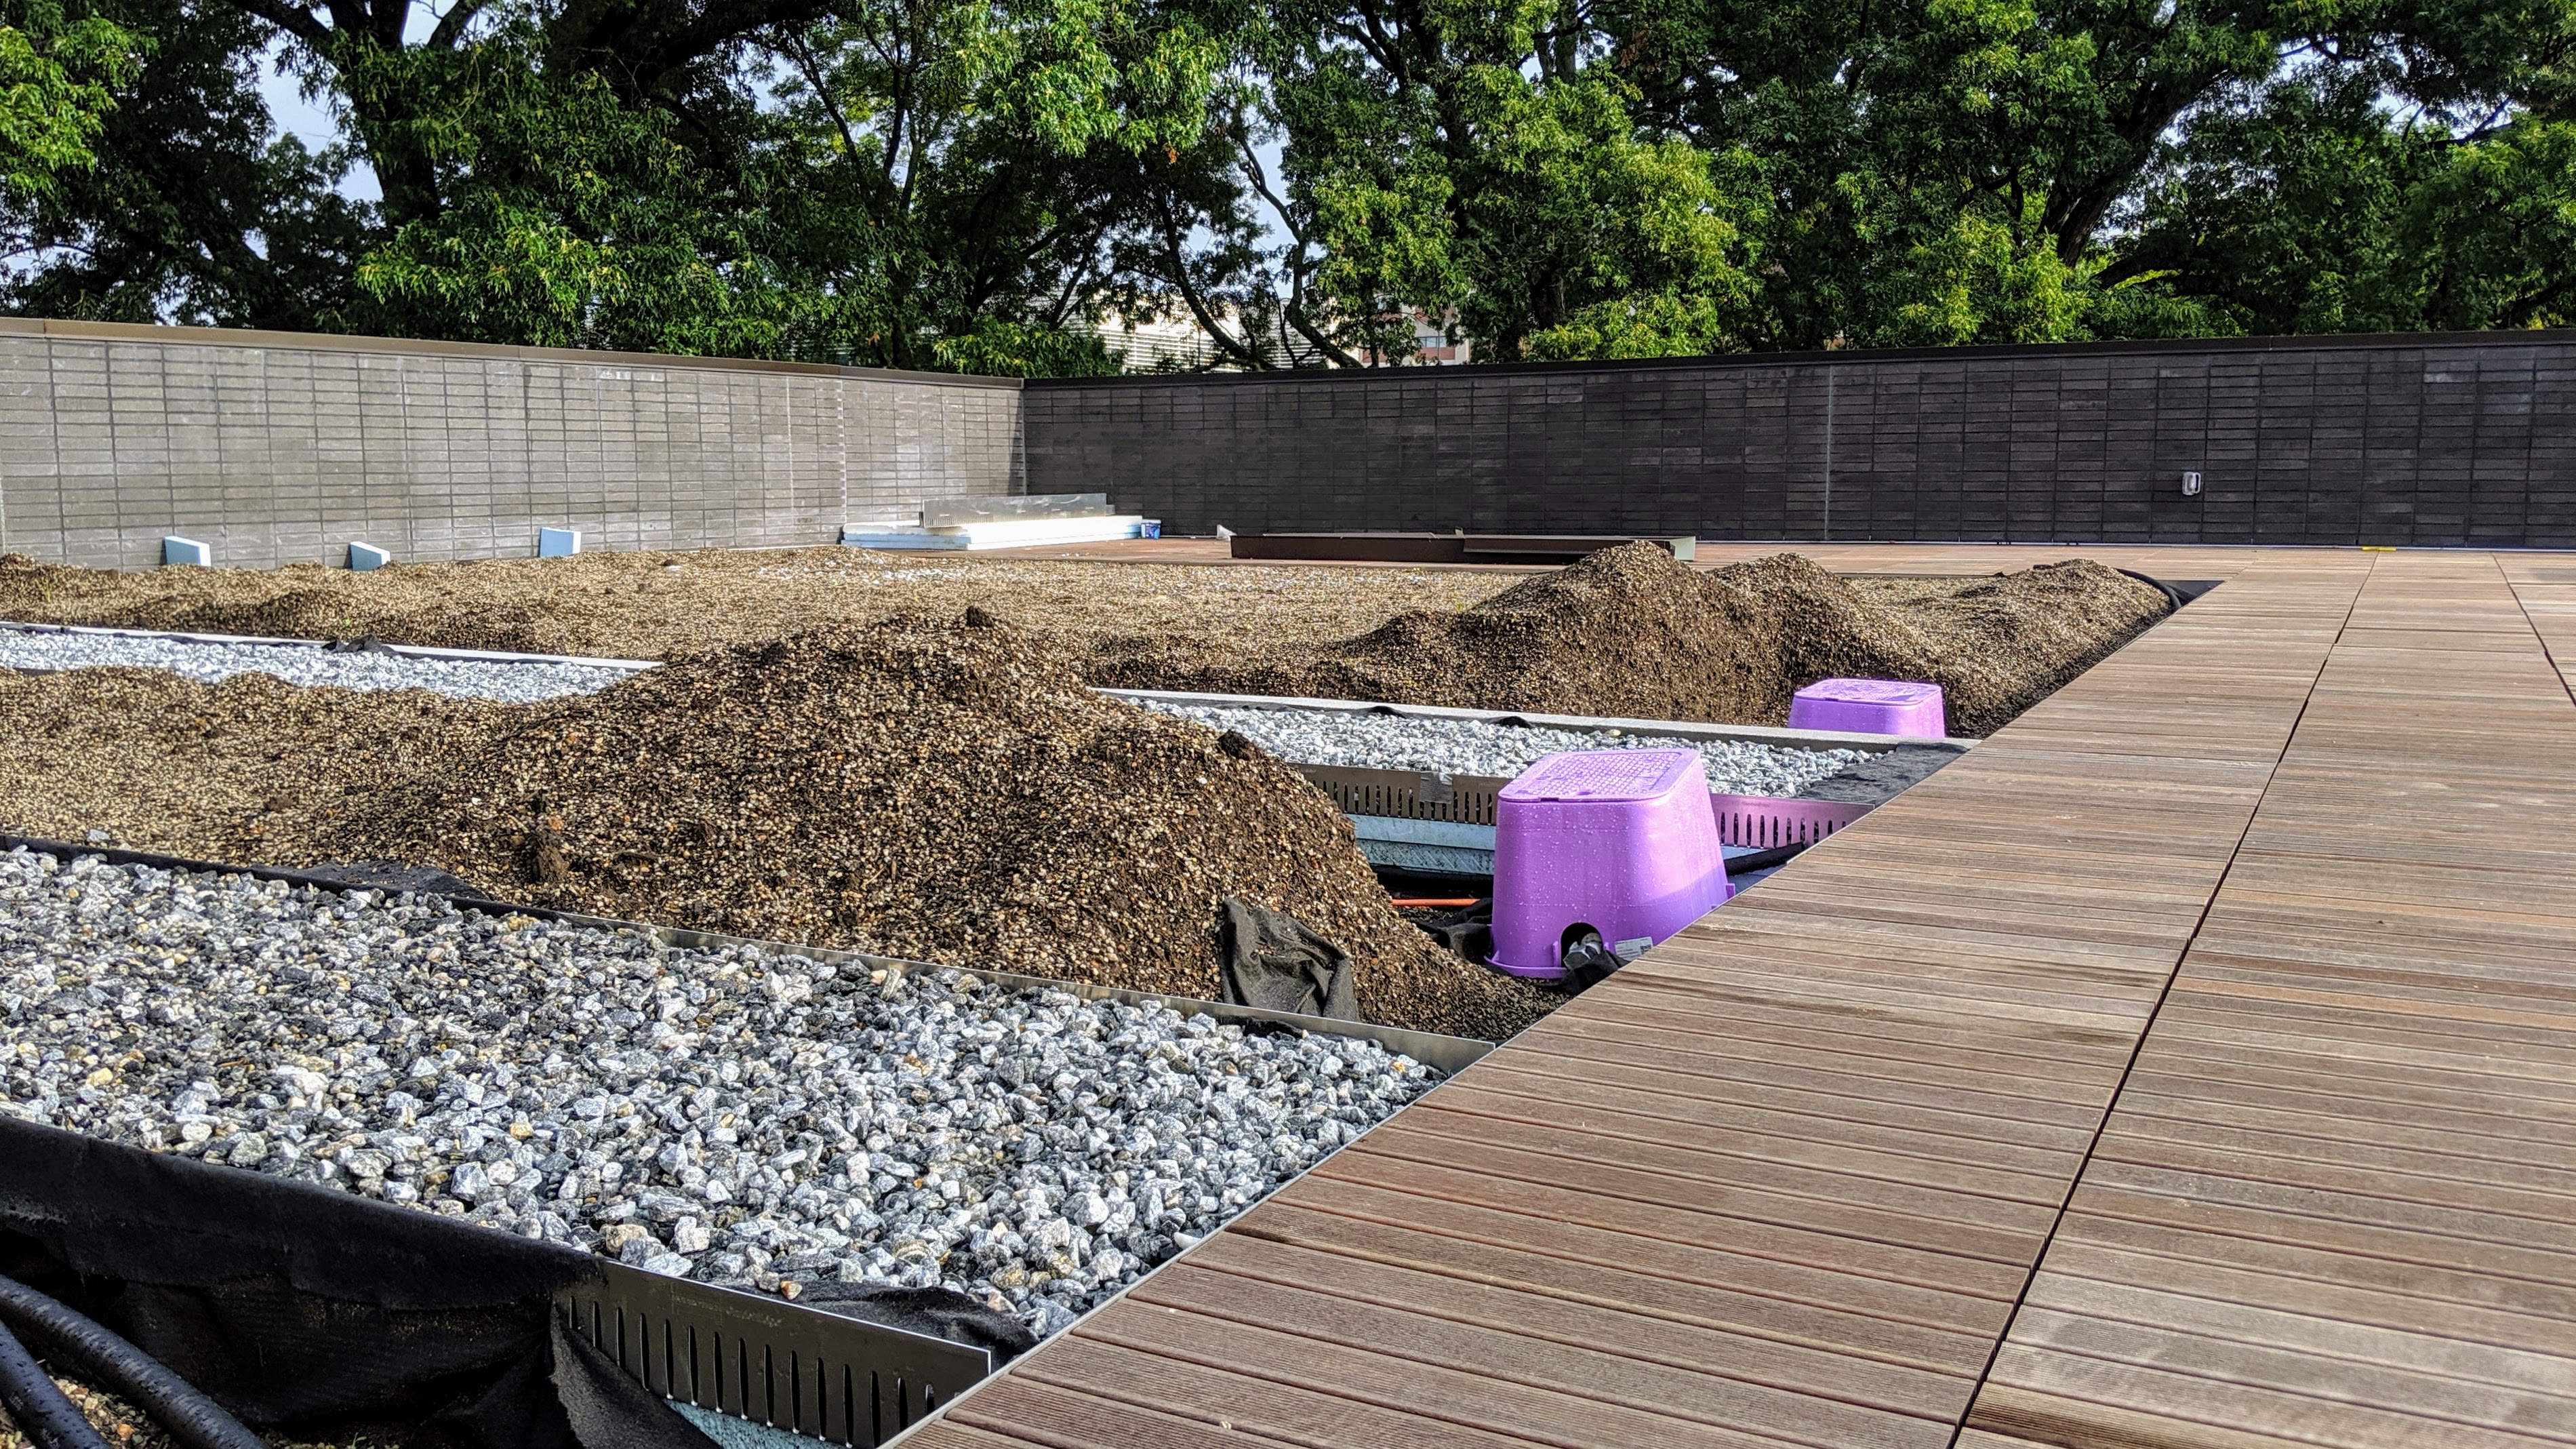 The rooftop garden's soil is also part of the rainfall management system.